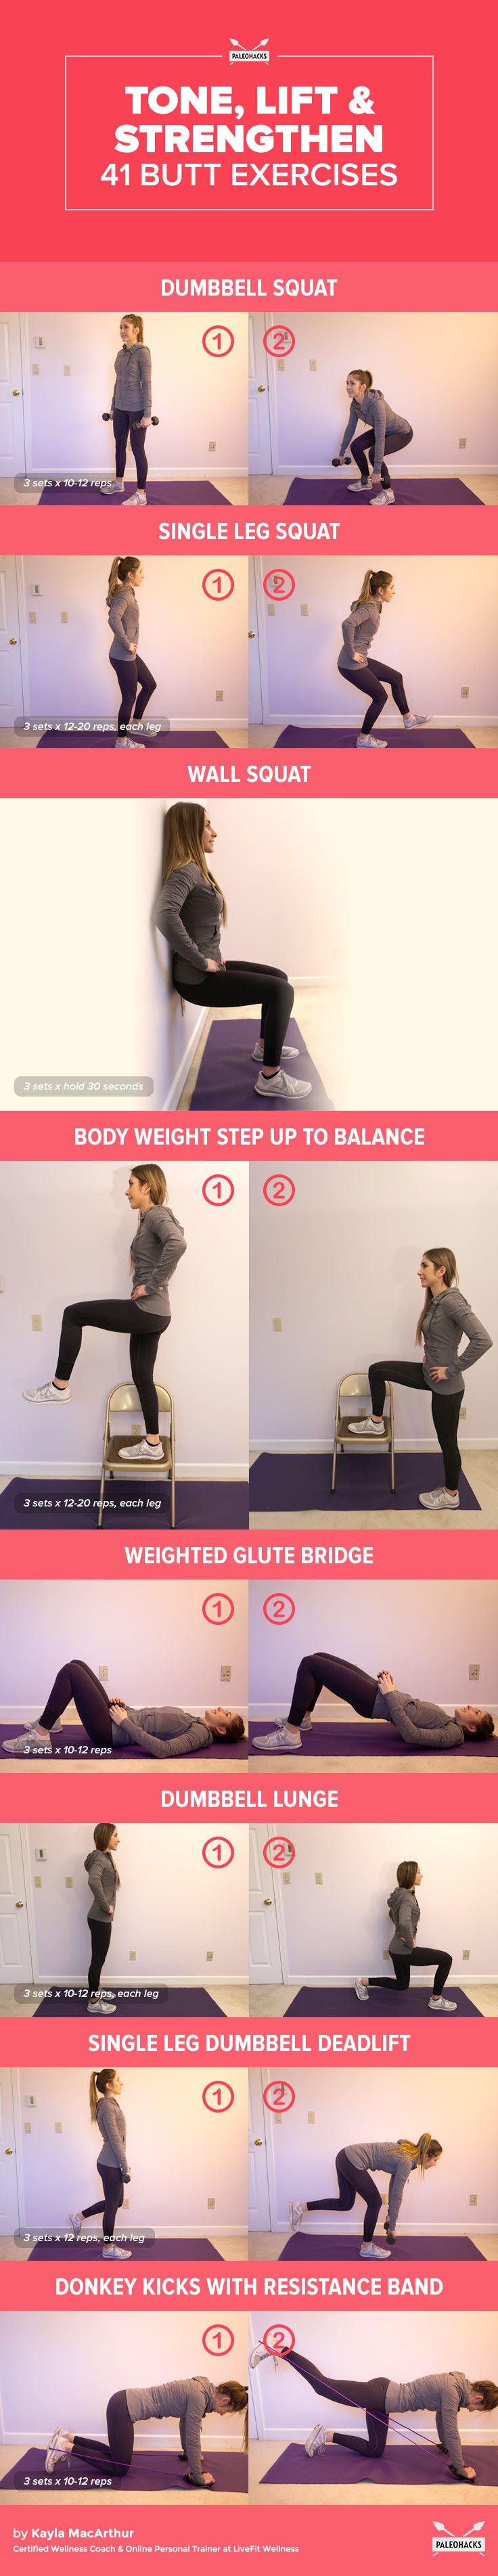 TONE-LIFT-AND-STRENGTHEN-41-BUTT-EXERCISES